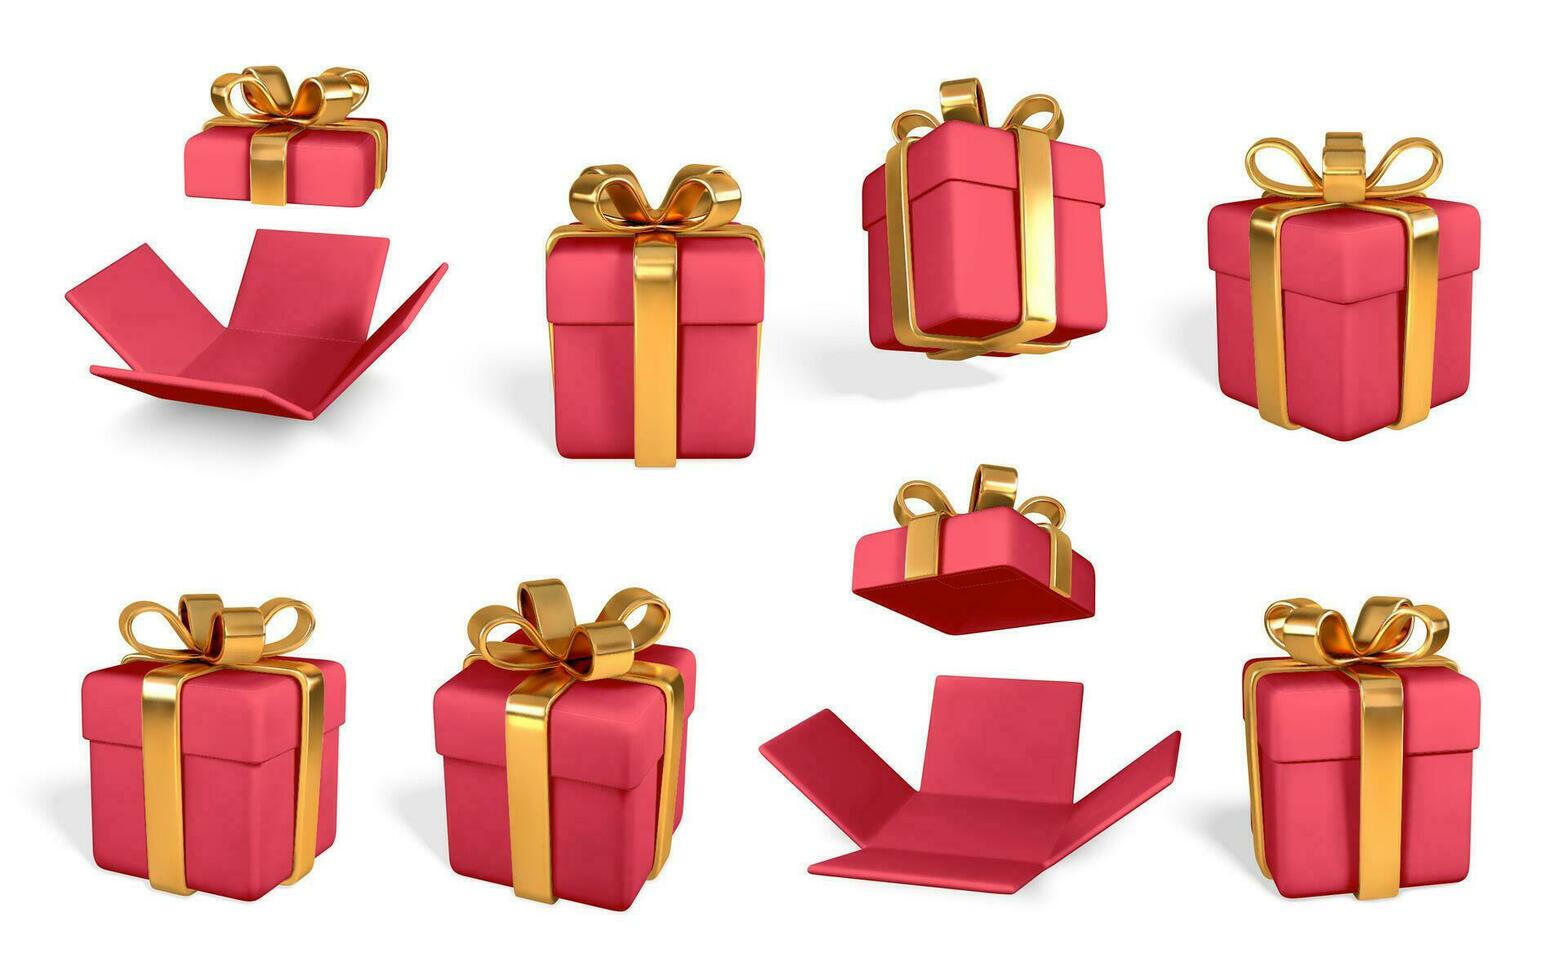 3D realistic red gift boxes with golden bow. Paper boxes with ribbon and shadow isolated on white background. Vector illustration